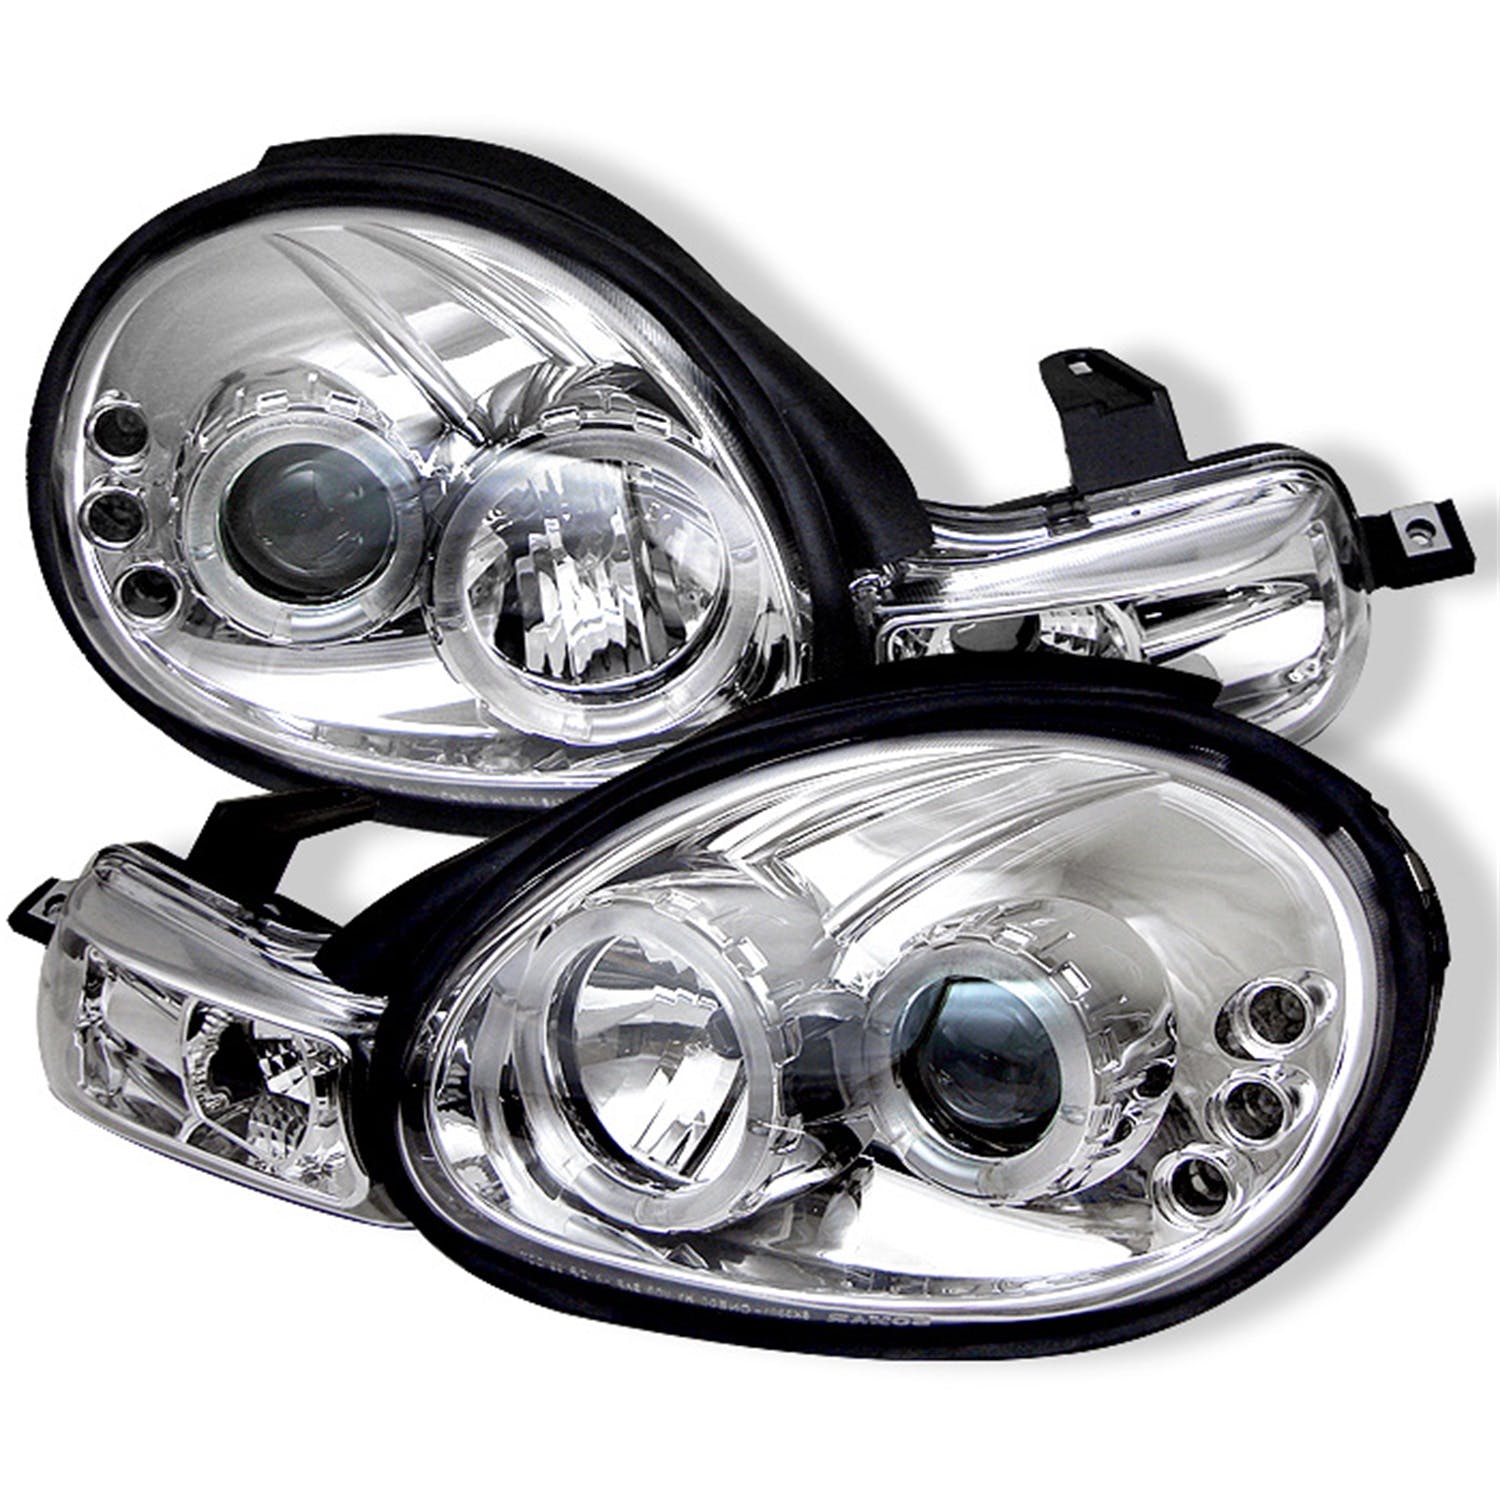 Spyder Auto 5009913 ( SPYDER ) DODGE NEON 00-02 PROJECTOR HEADLIGHTS-LED HALO-LED ( REPLACEABLE LEDS